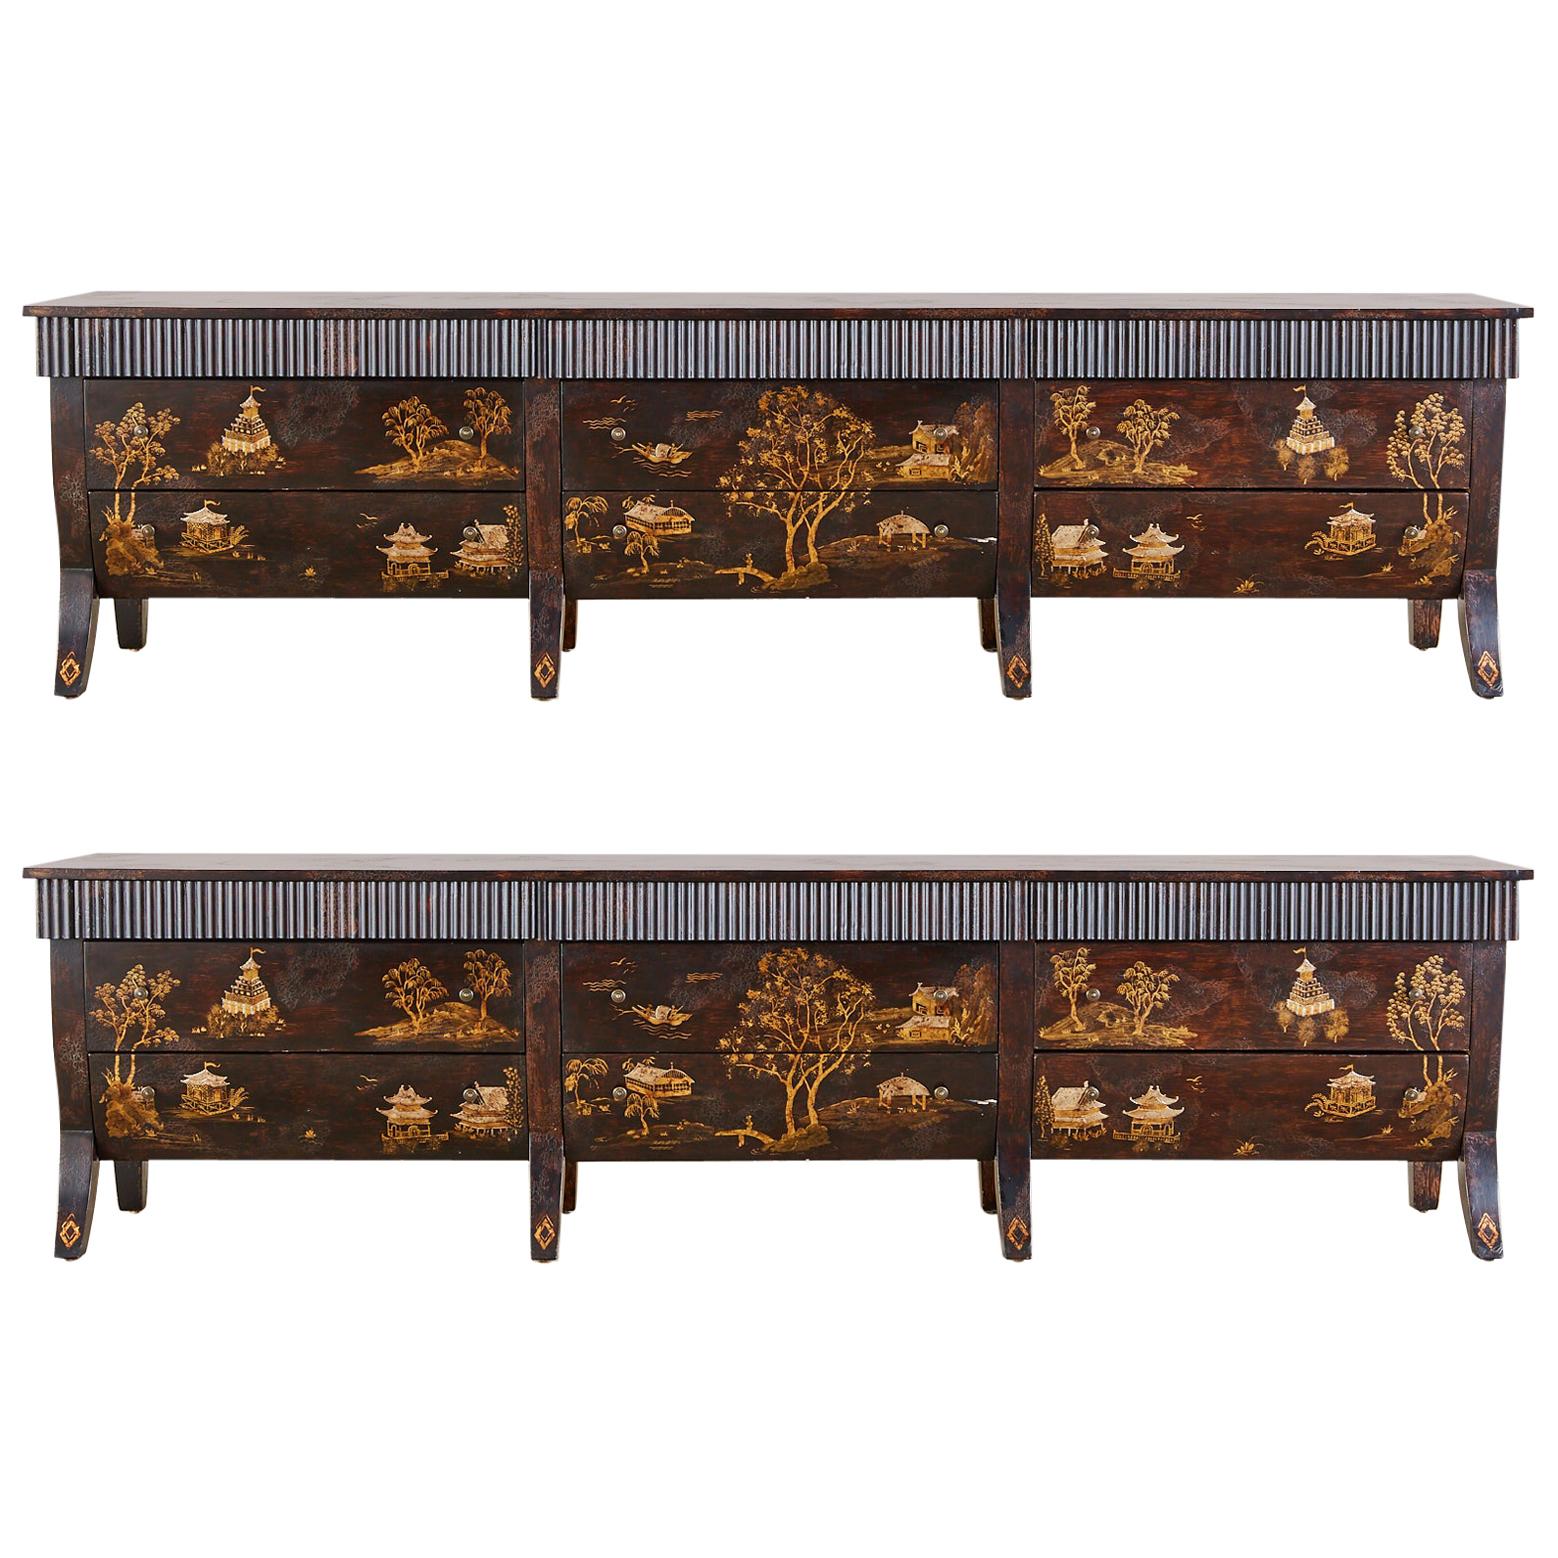 Monumental Rose Tarlow Japanned Dresser or Chests of Drawers